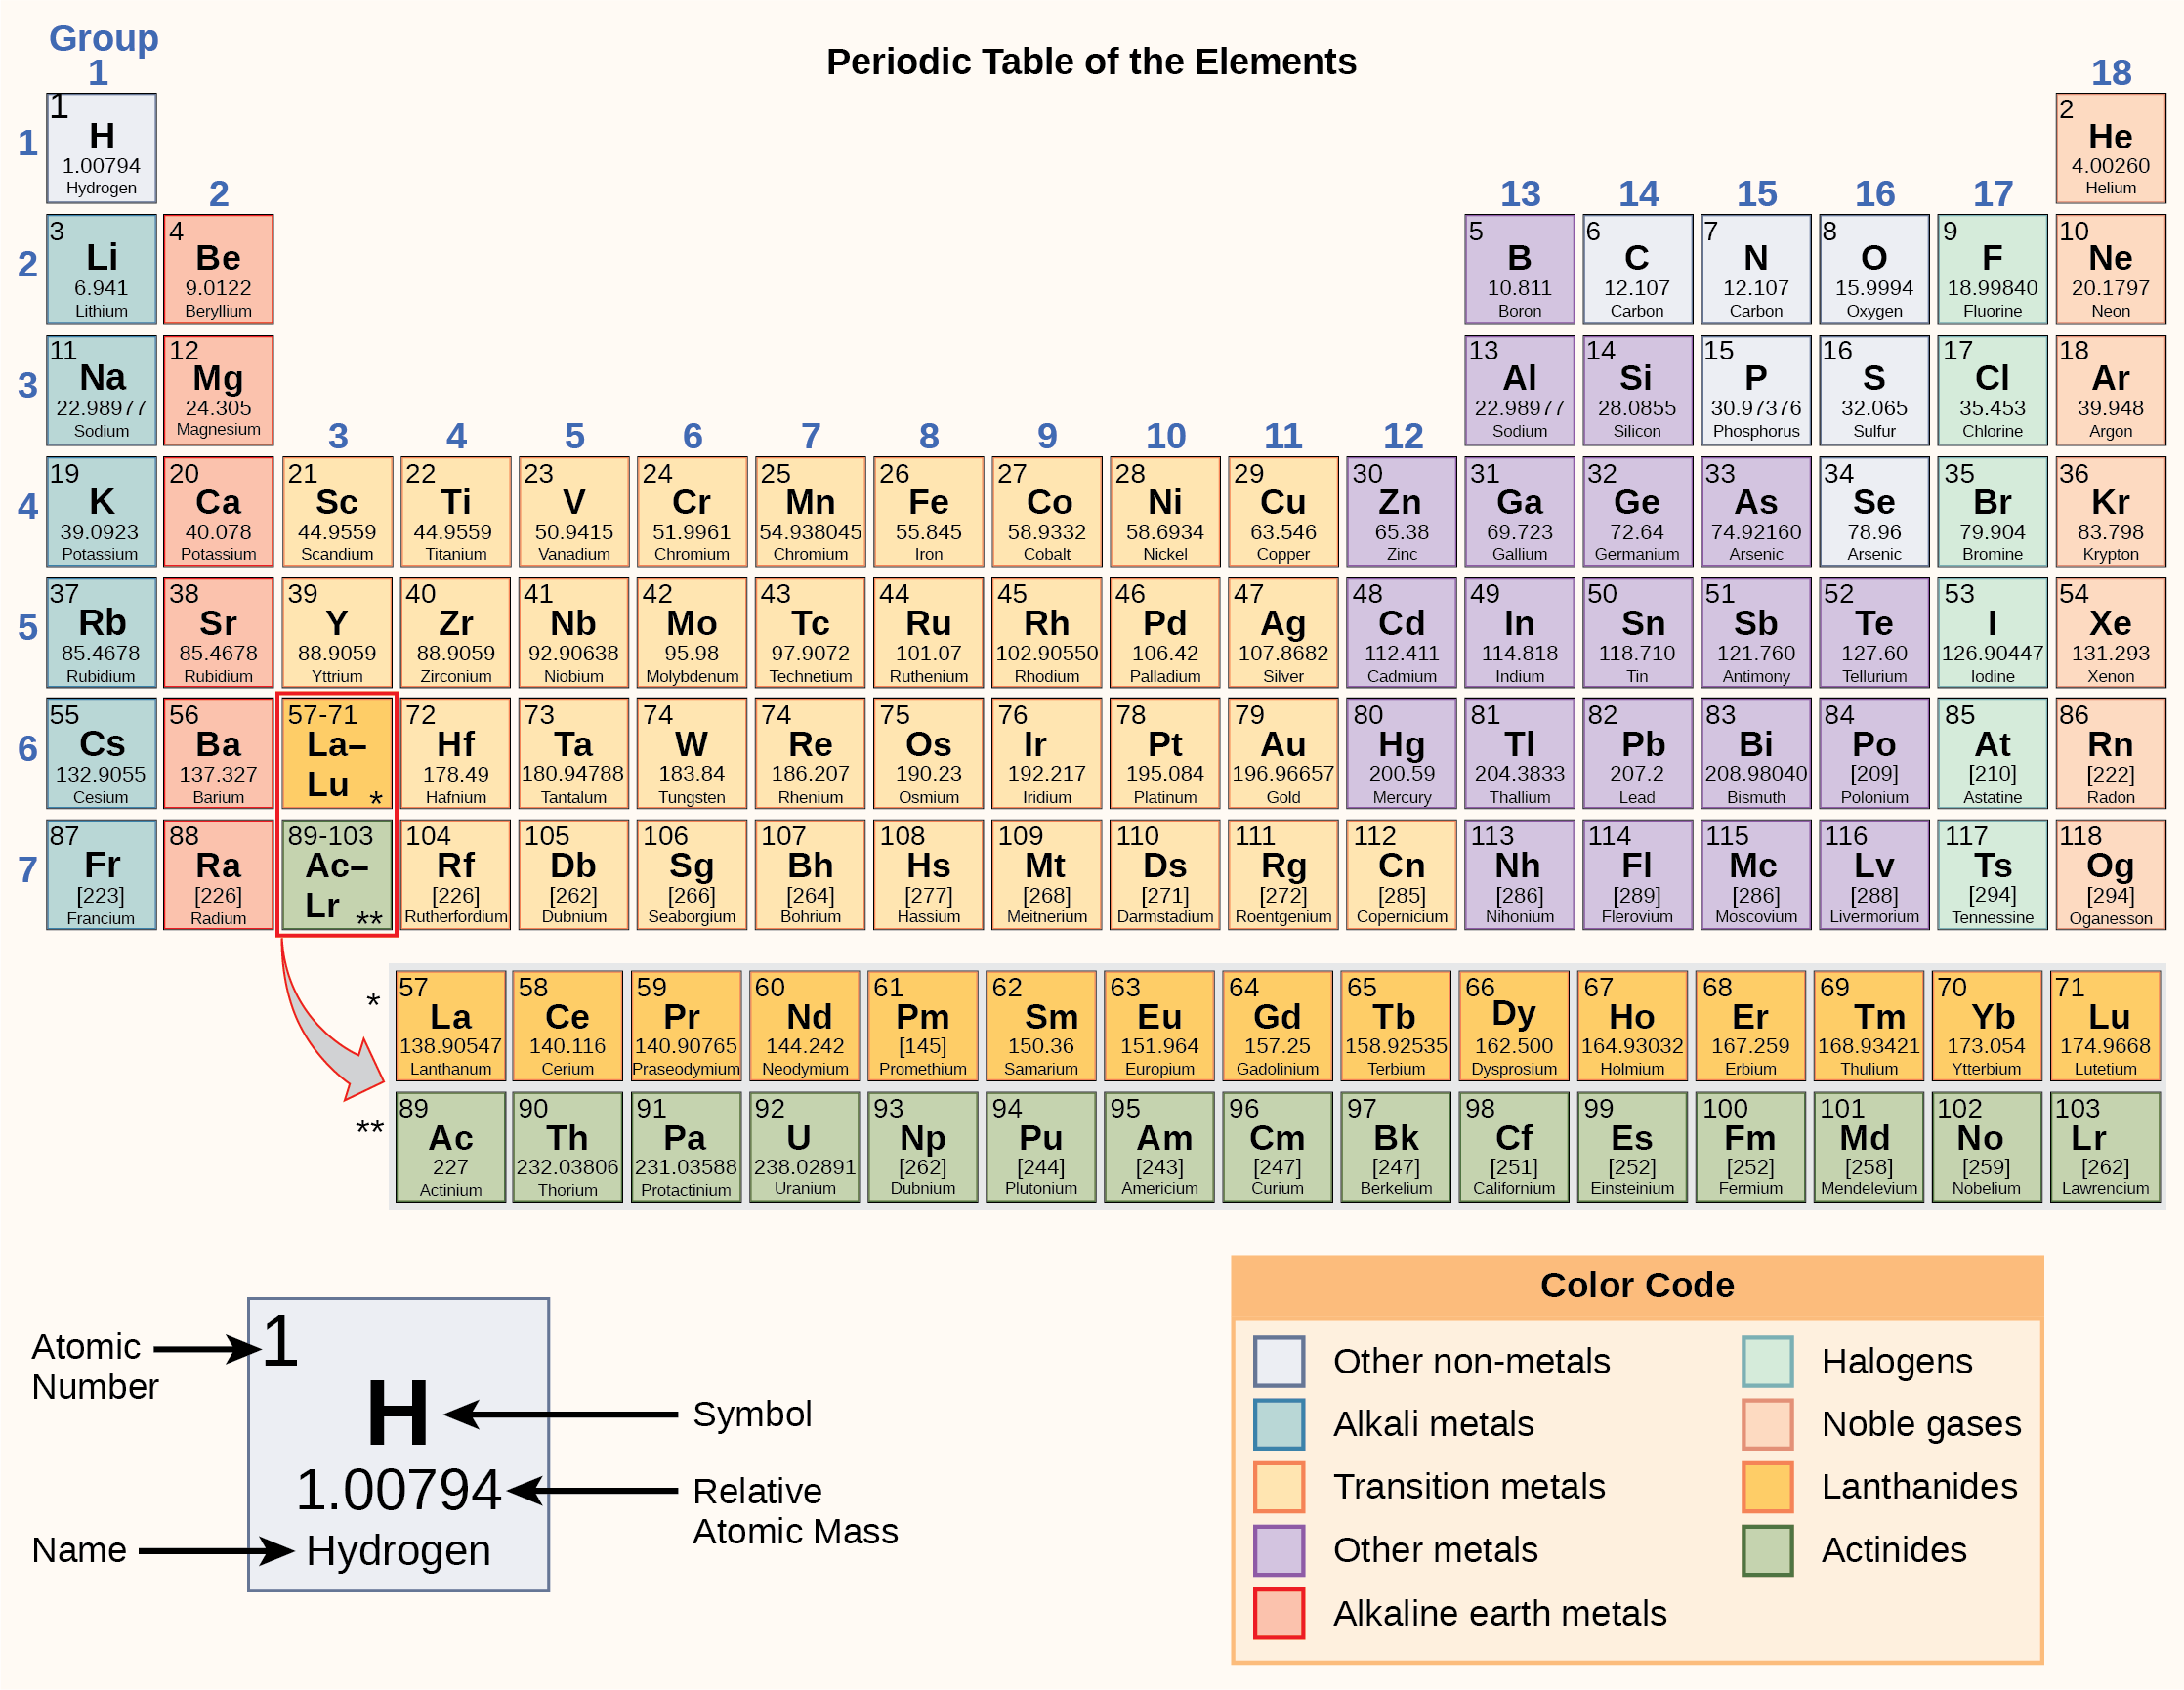 The periodic table consists of eighteen groups and seven periods. Each element has its own square. Within each square is the following information; the atomic number, the symbol, the relative atomic mass, and the name. For example, hydrogen's atomic number is 1, symbol is the letter H; relative atomic mass is 1.01, and name is hydrogen. Two additional rows of elements, known as the lanthanides and actinides, are placed beneath the main table. The lanthanides include elements 57 through 71 and belong in period seven between groups three and four. The actinides include elements 89 through 98 and belong in period eight between the same groups. These elements are placed separately to make the table more compact. For each element, the name, atomic symbol, atomic number, and atomic mass are provided. The atomic number is a whole number that represents the number of protons. The atomic mass, which is the average mass of different isotopes, is estimated to two decimal places. The elements are divided into three categories: metals, nonmetals and metalloids. These form a diagonal line from period two, group thirteen to period seven, group sixteen. All elements to the left of the metalloids are metals, and all elements to the right are nonmetals.